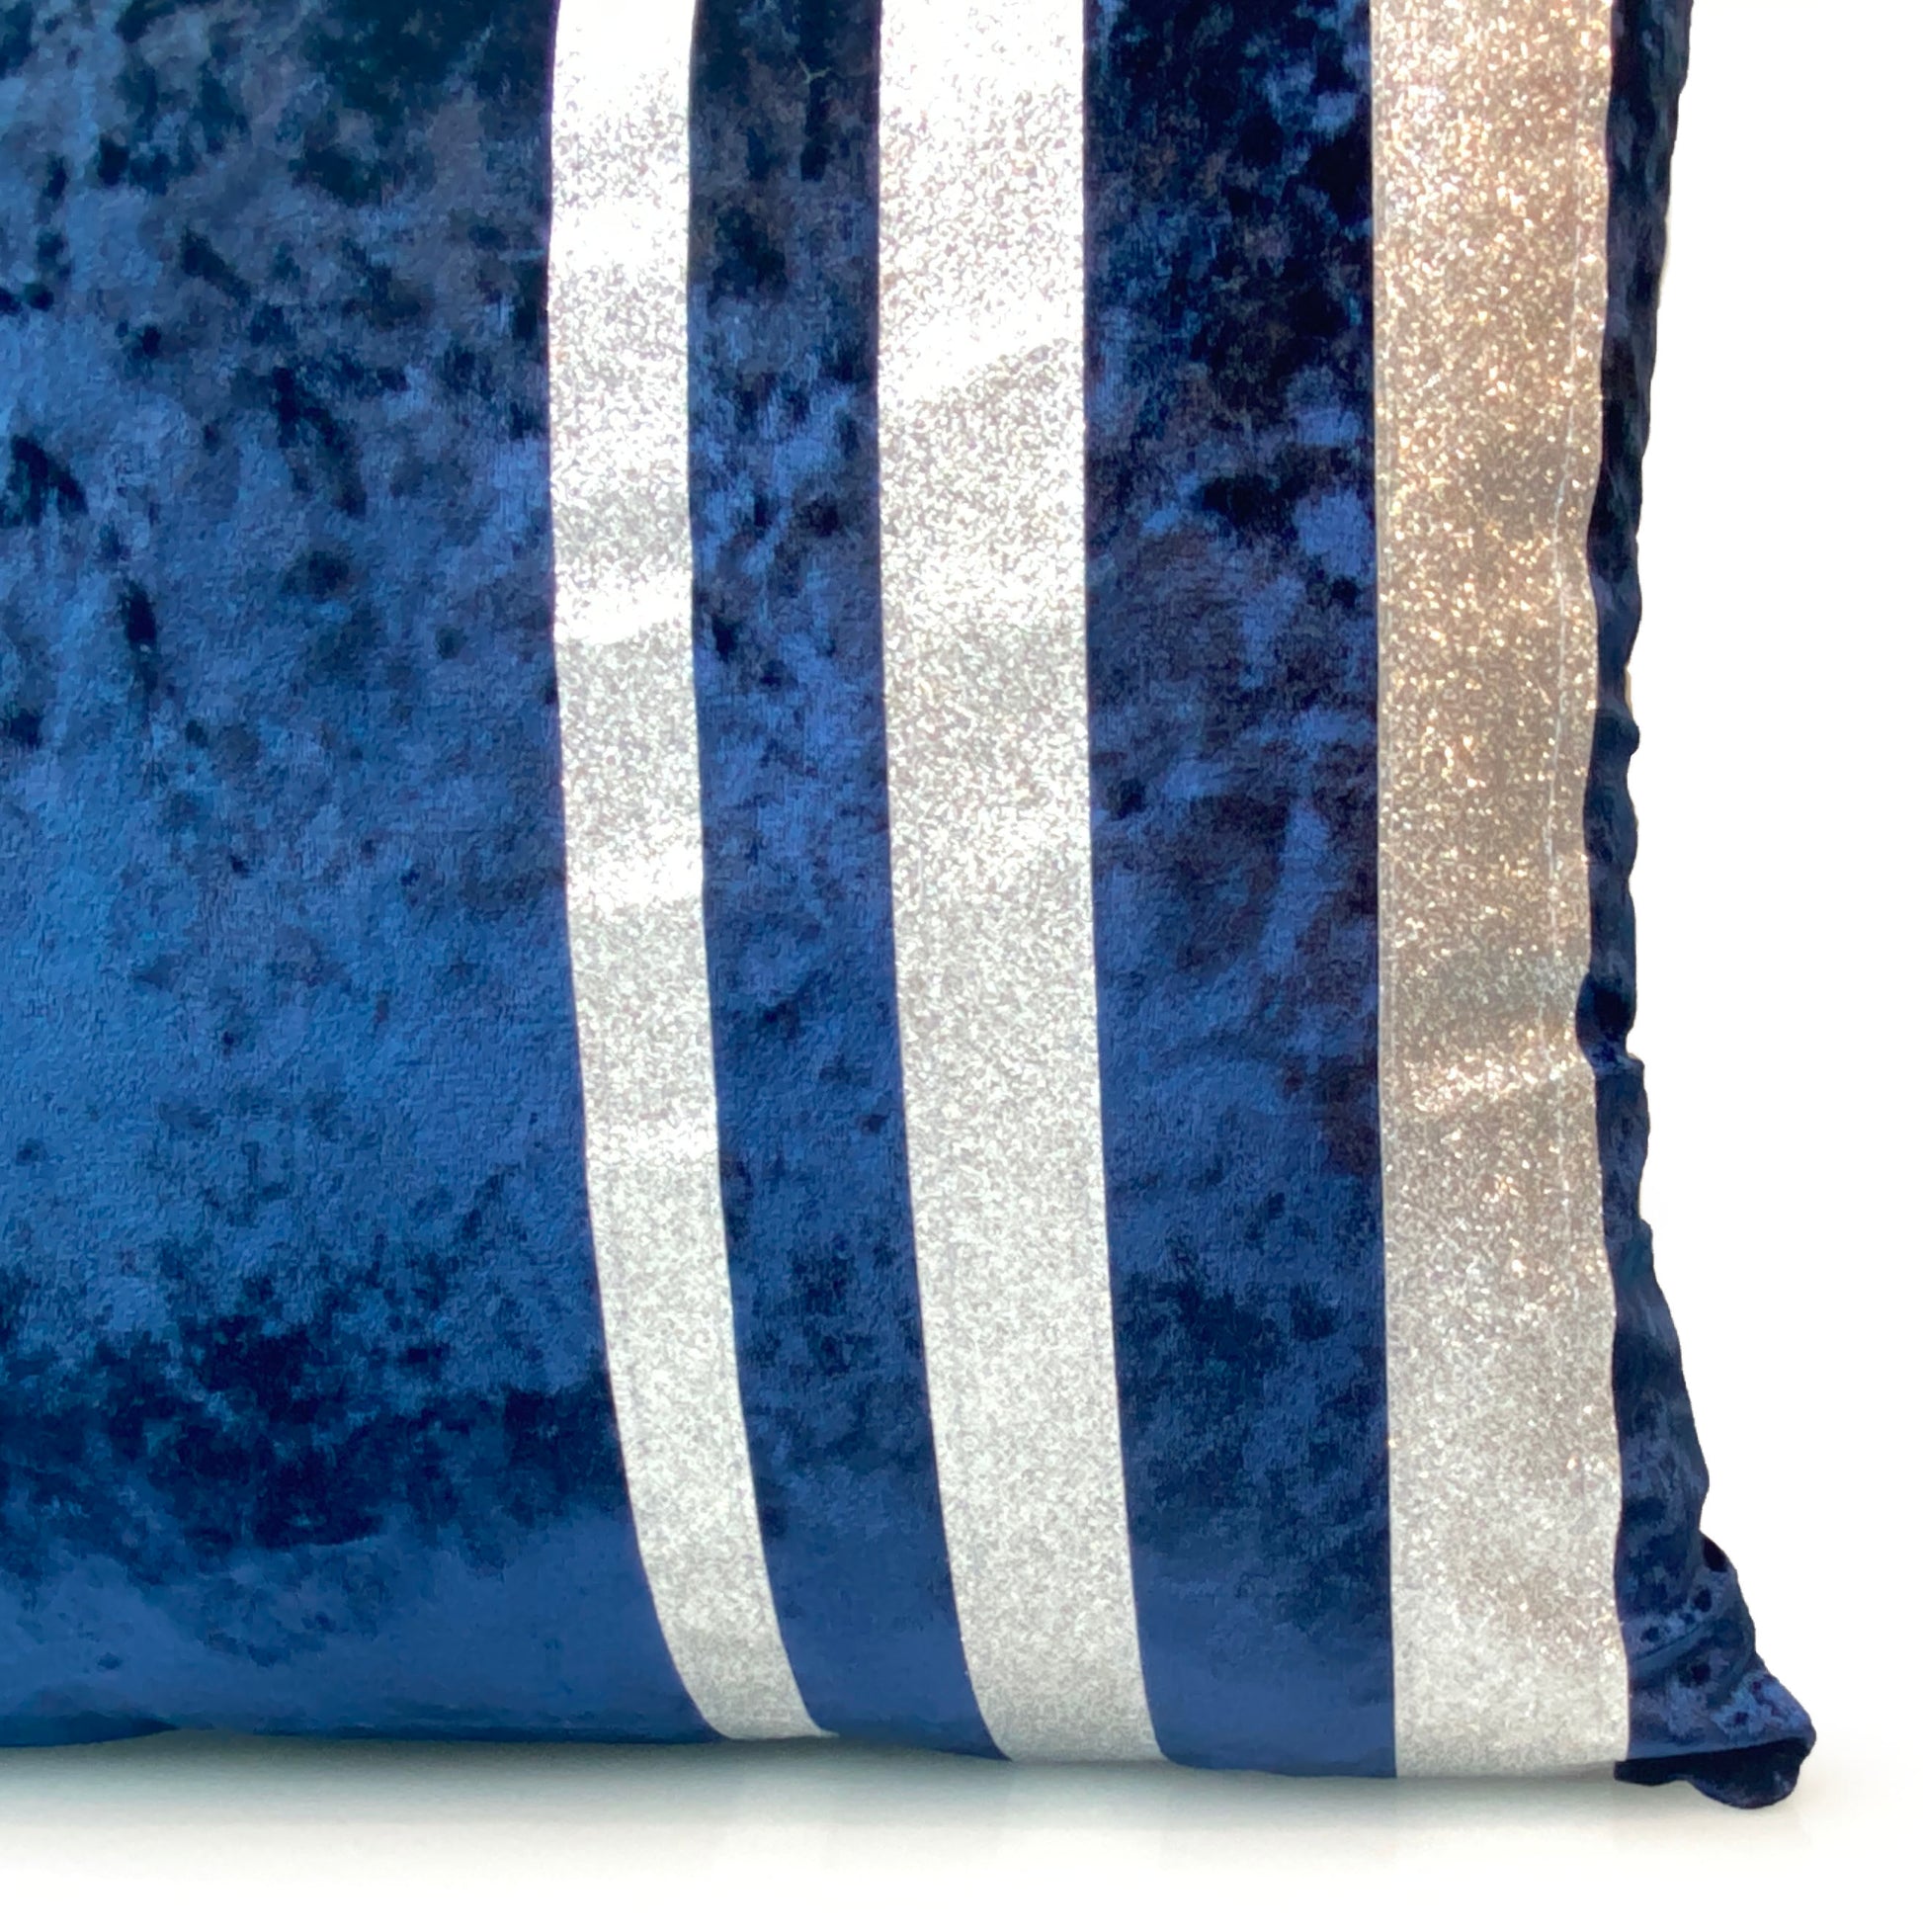 Cushions Covers Velvet Crushed or filled cushions Glitter stripe NAVY BLUE closer view